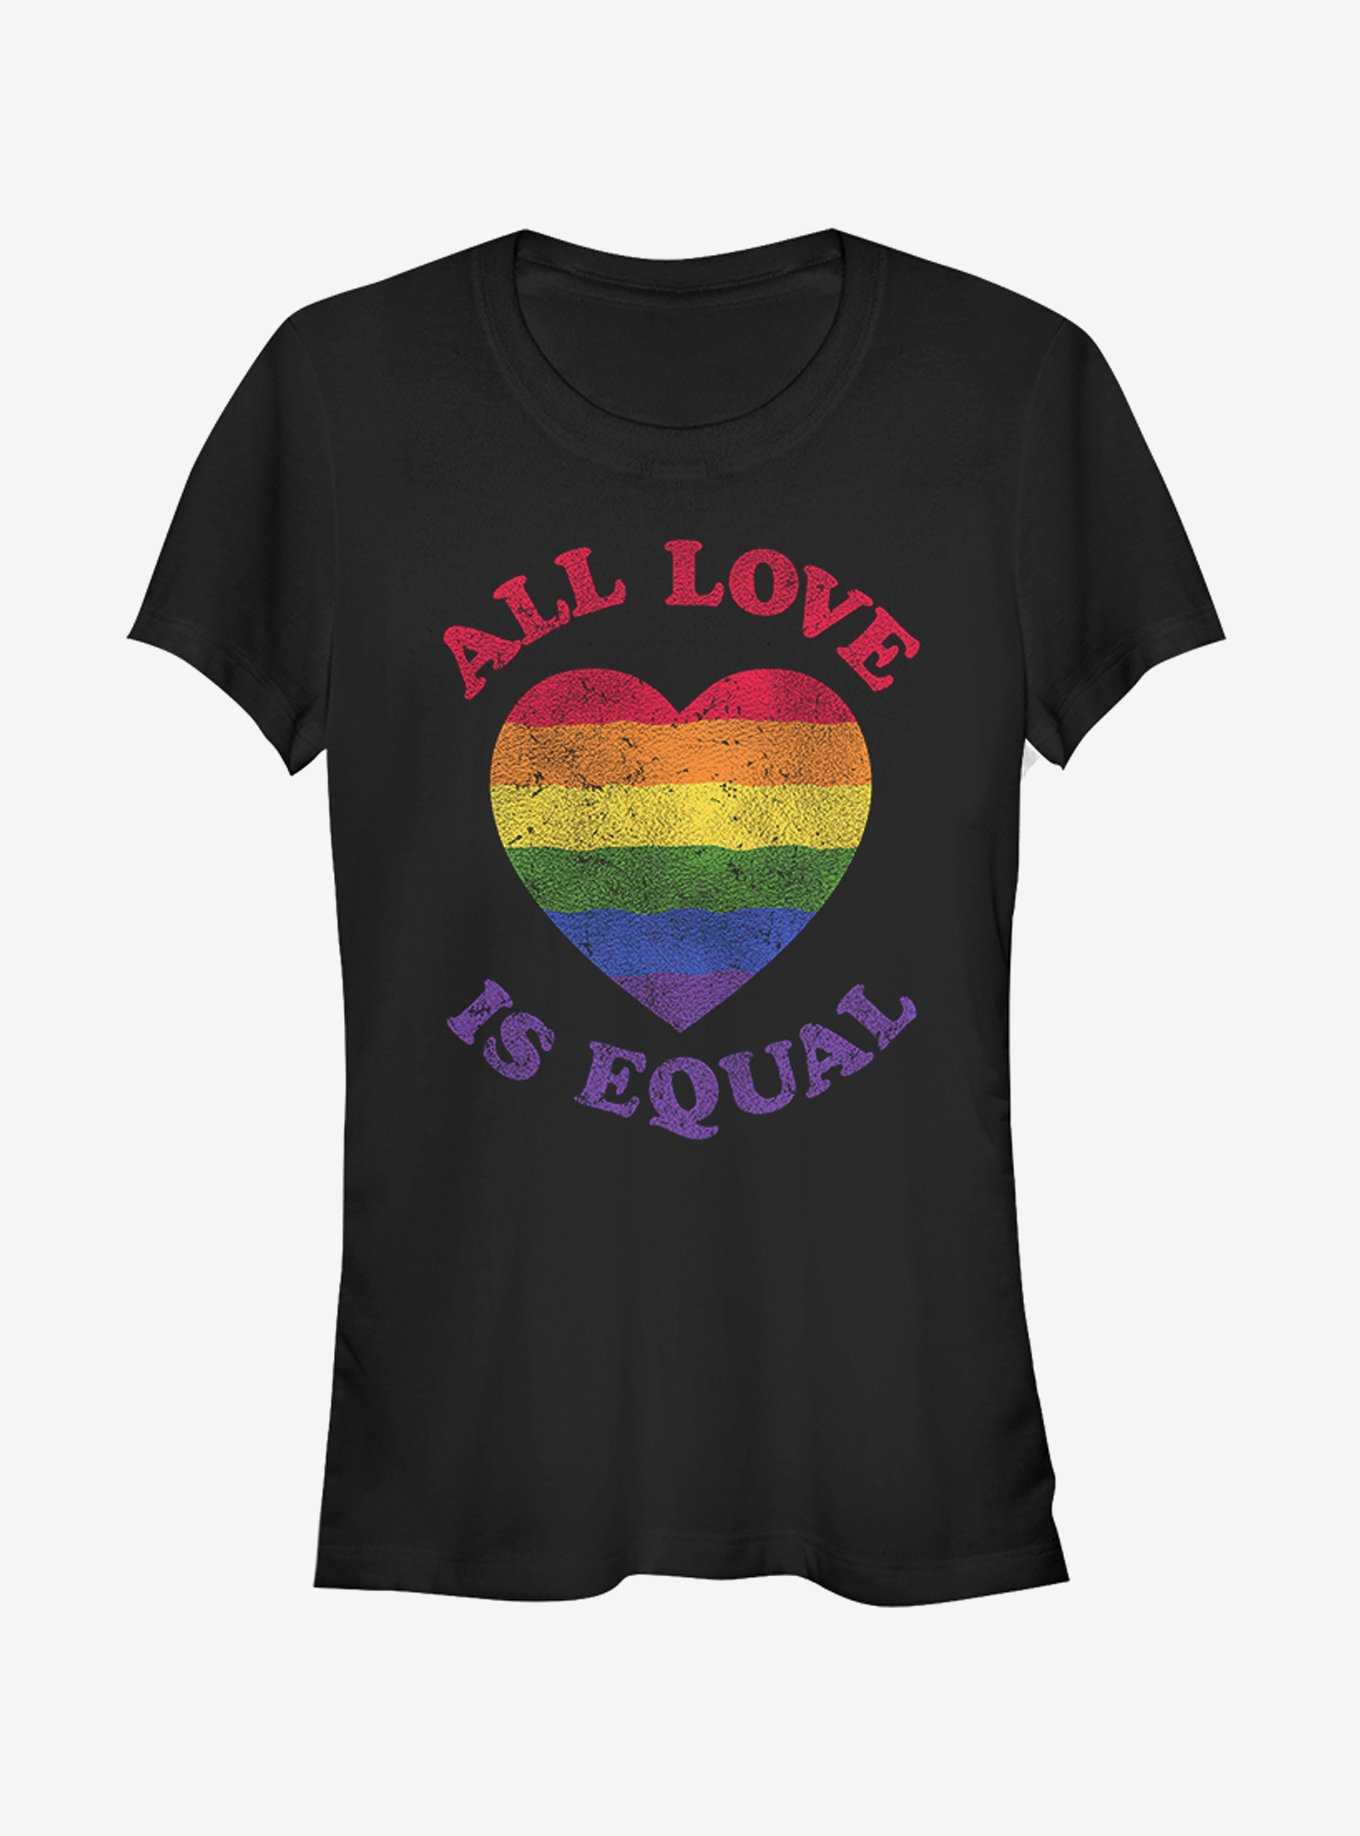 All Love Is Equal Girl's Tee, , hi-res